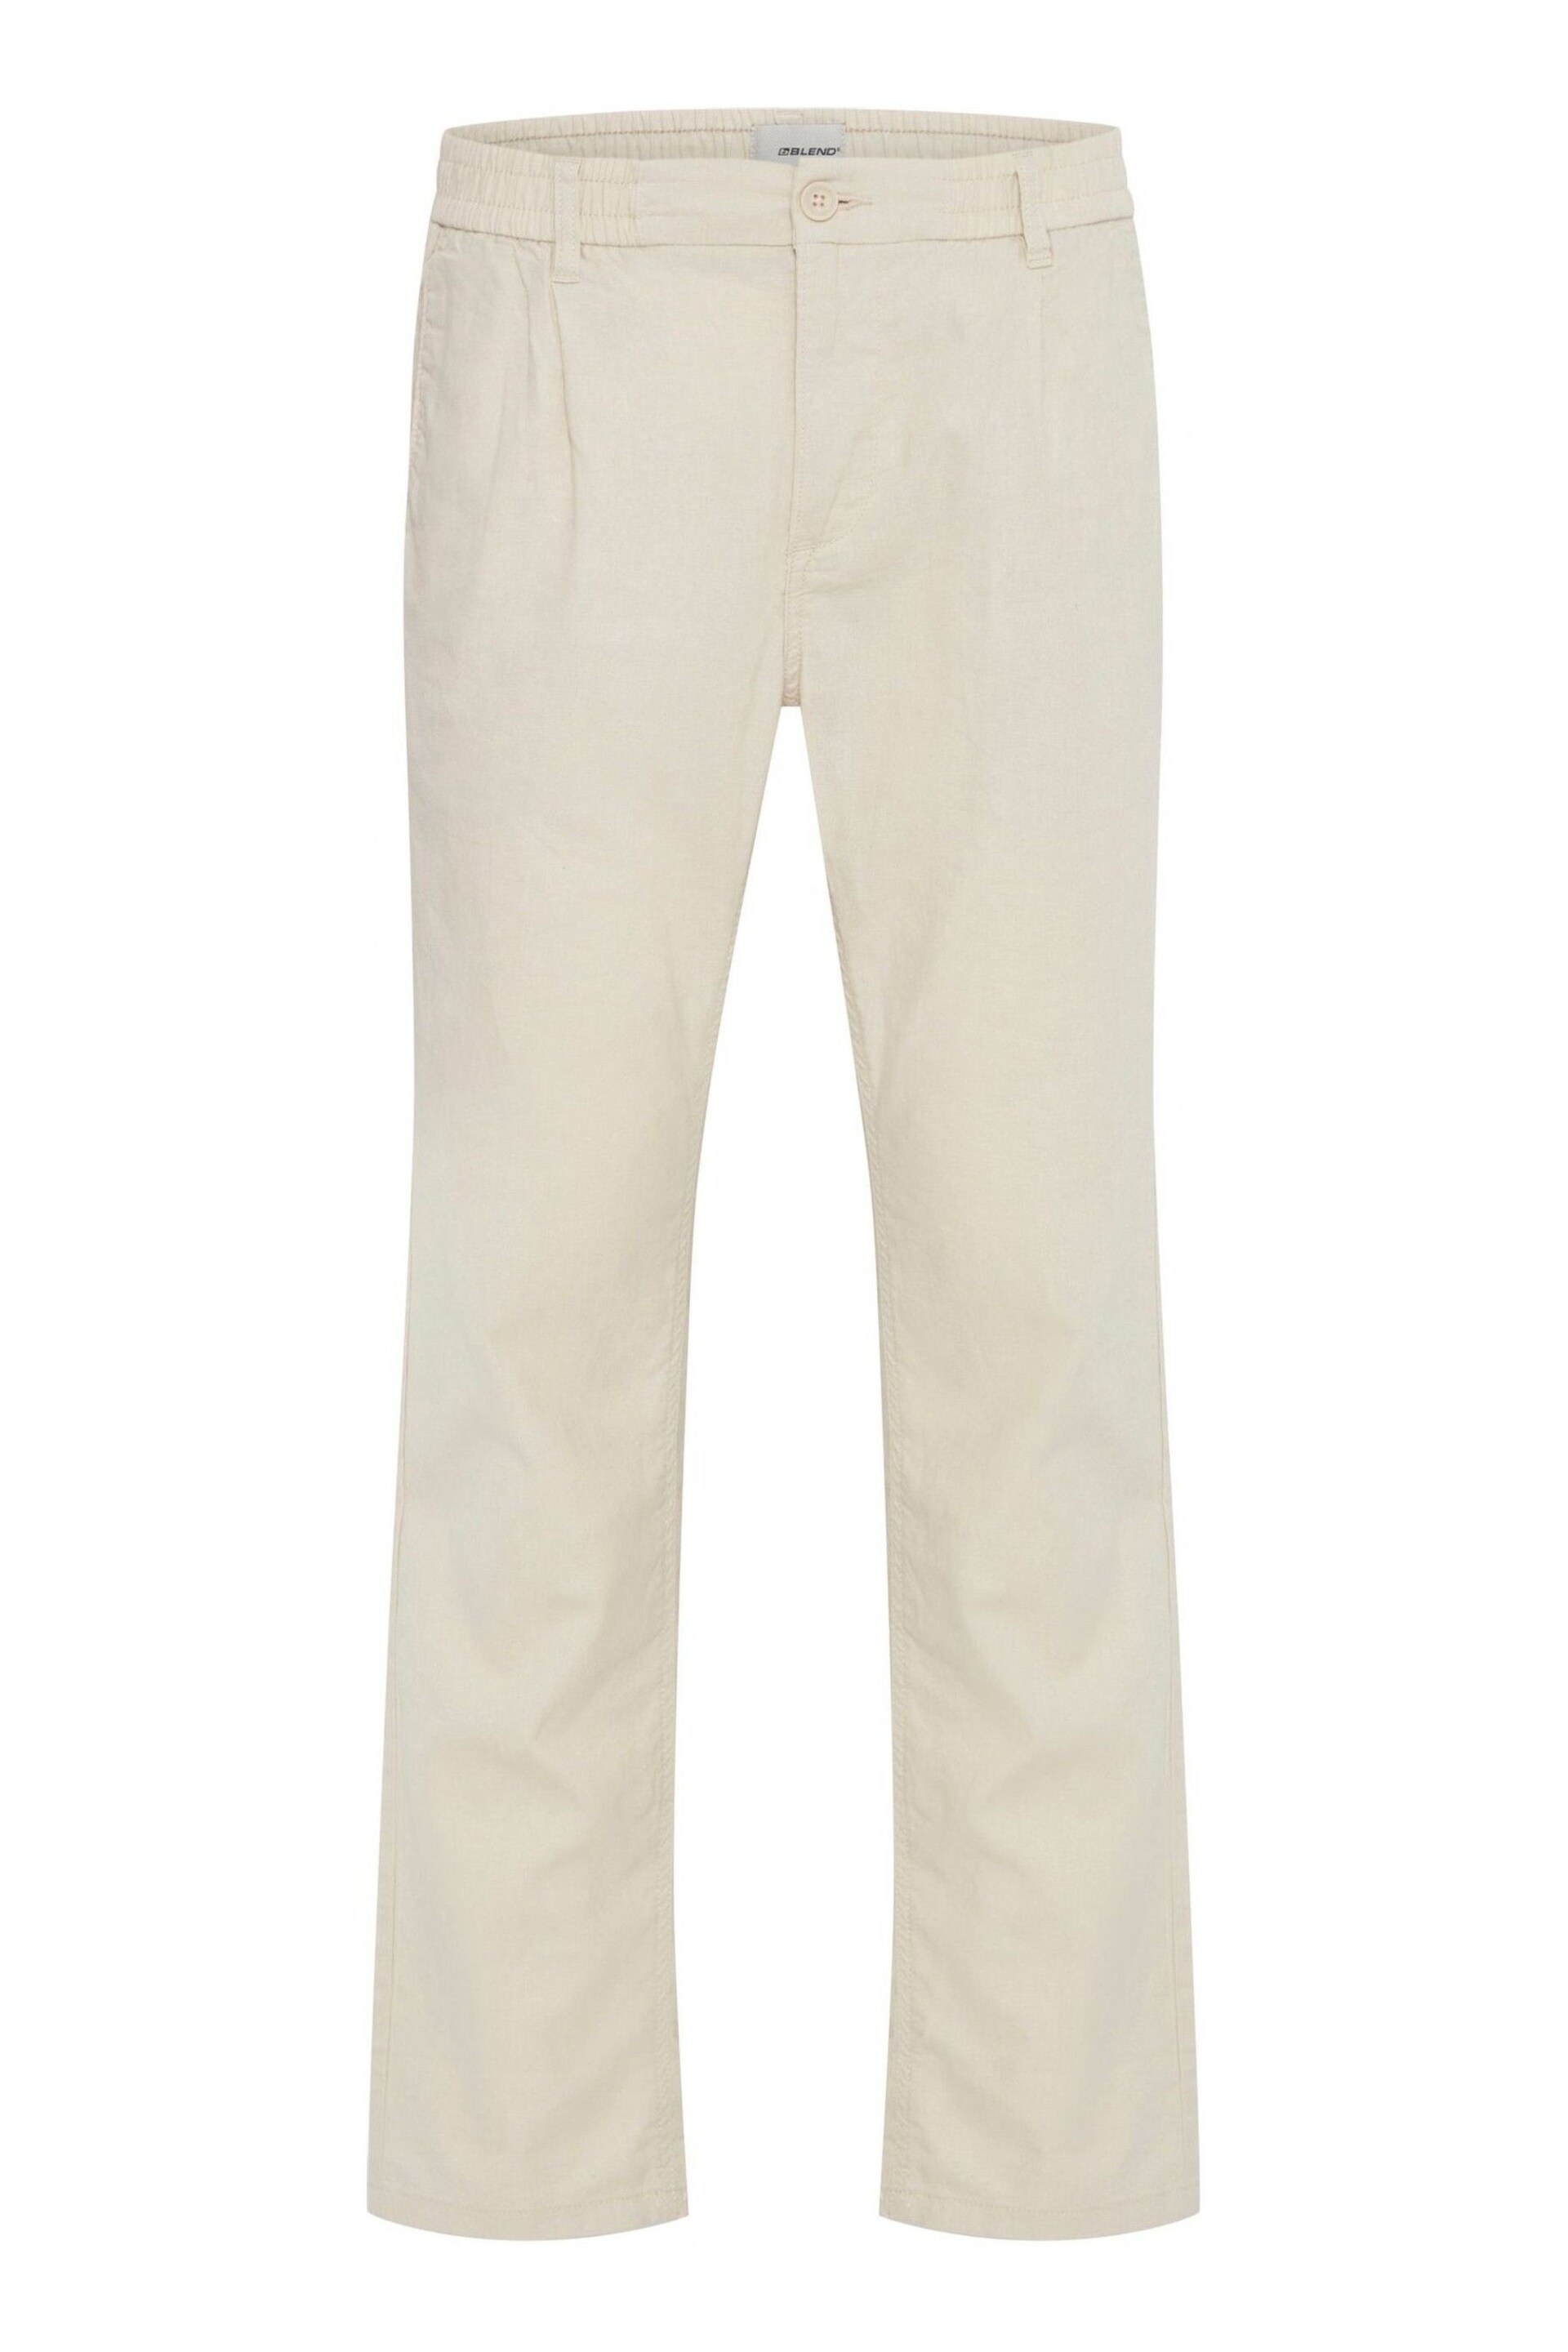 Blend Cream Linen Chino Trousers - Image 5 of 5